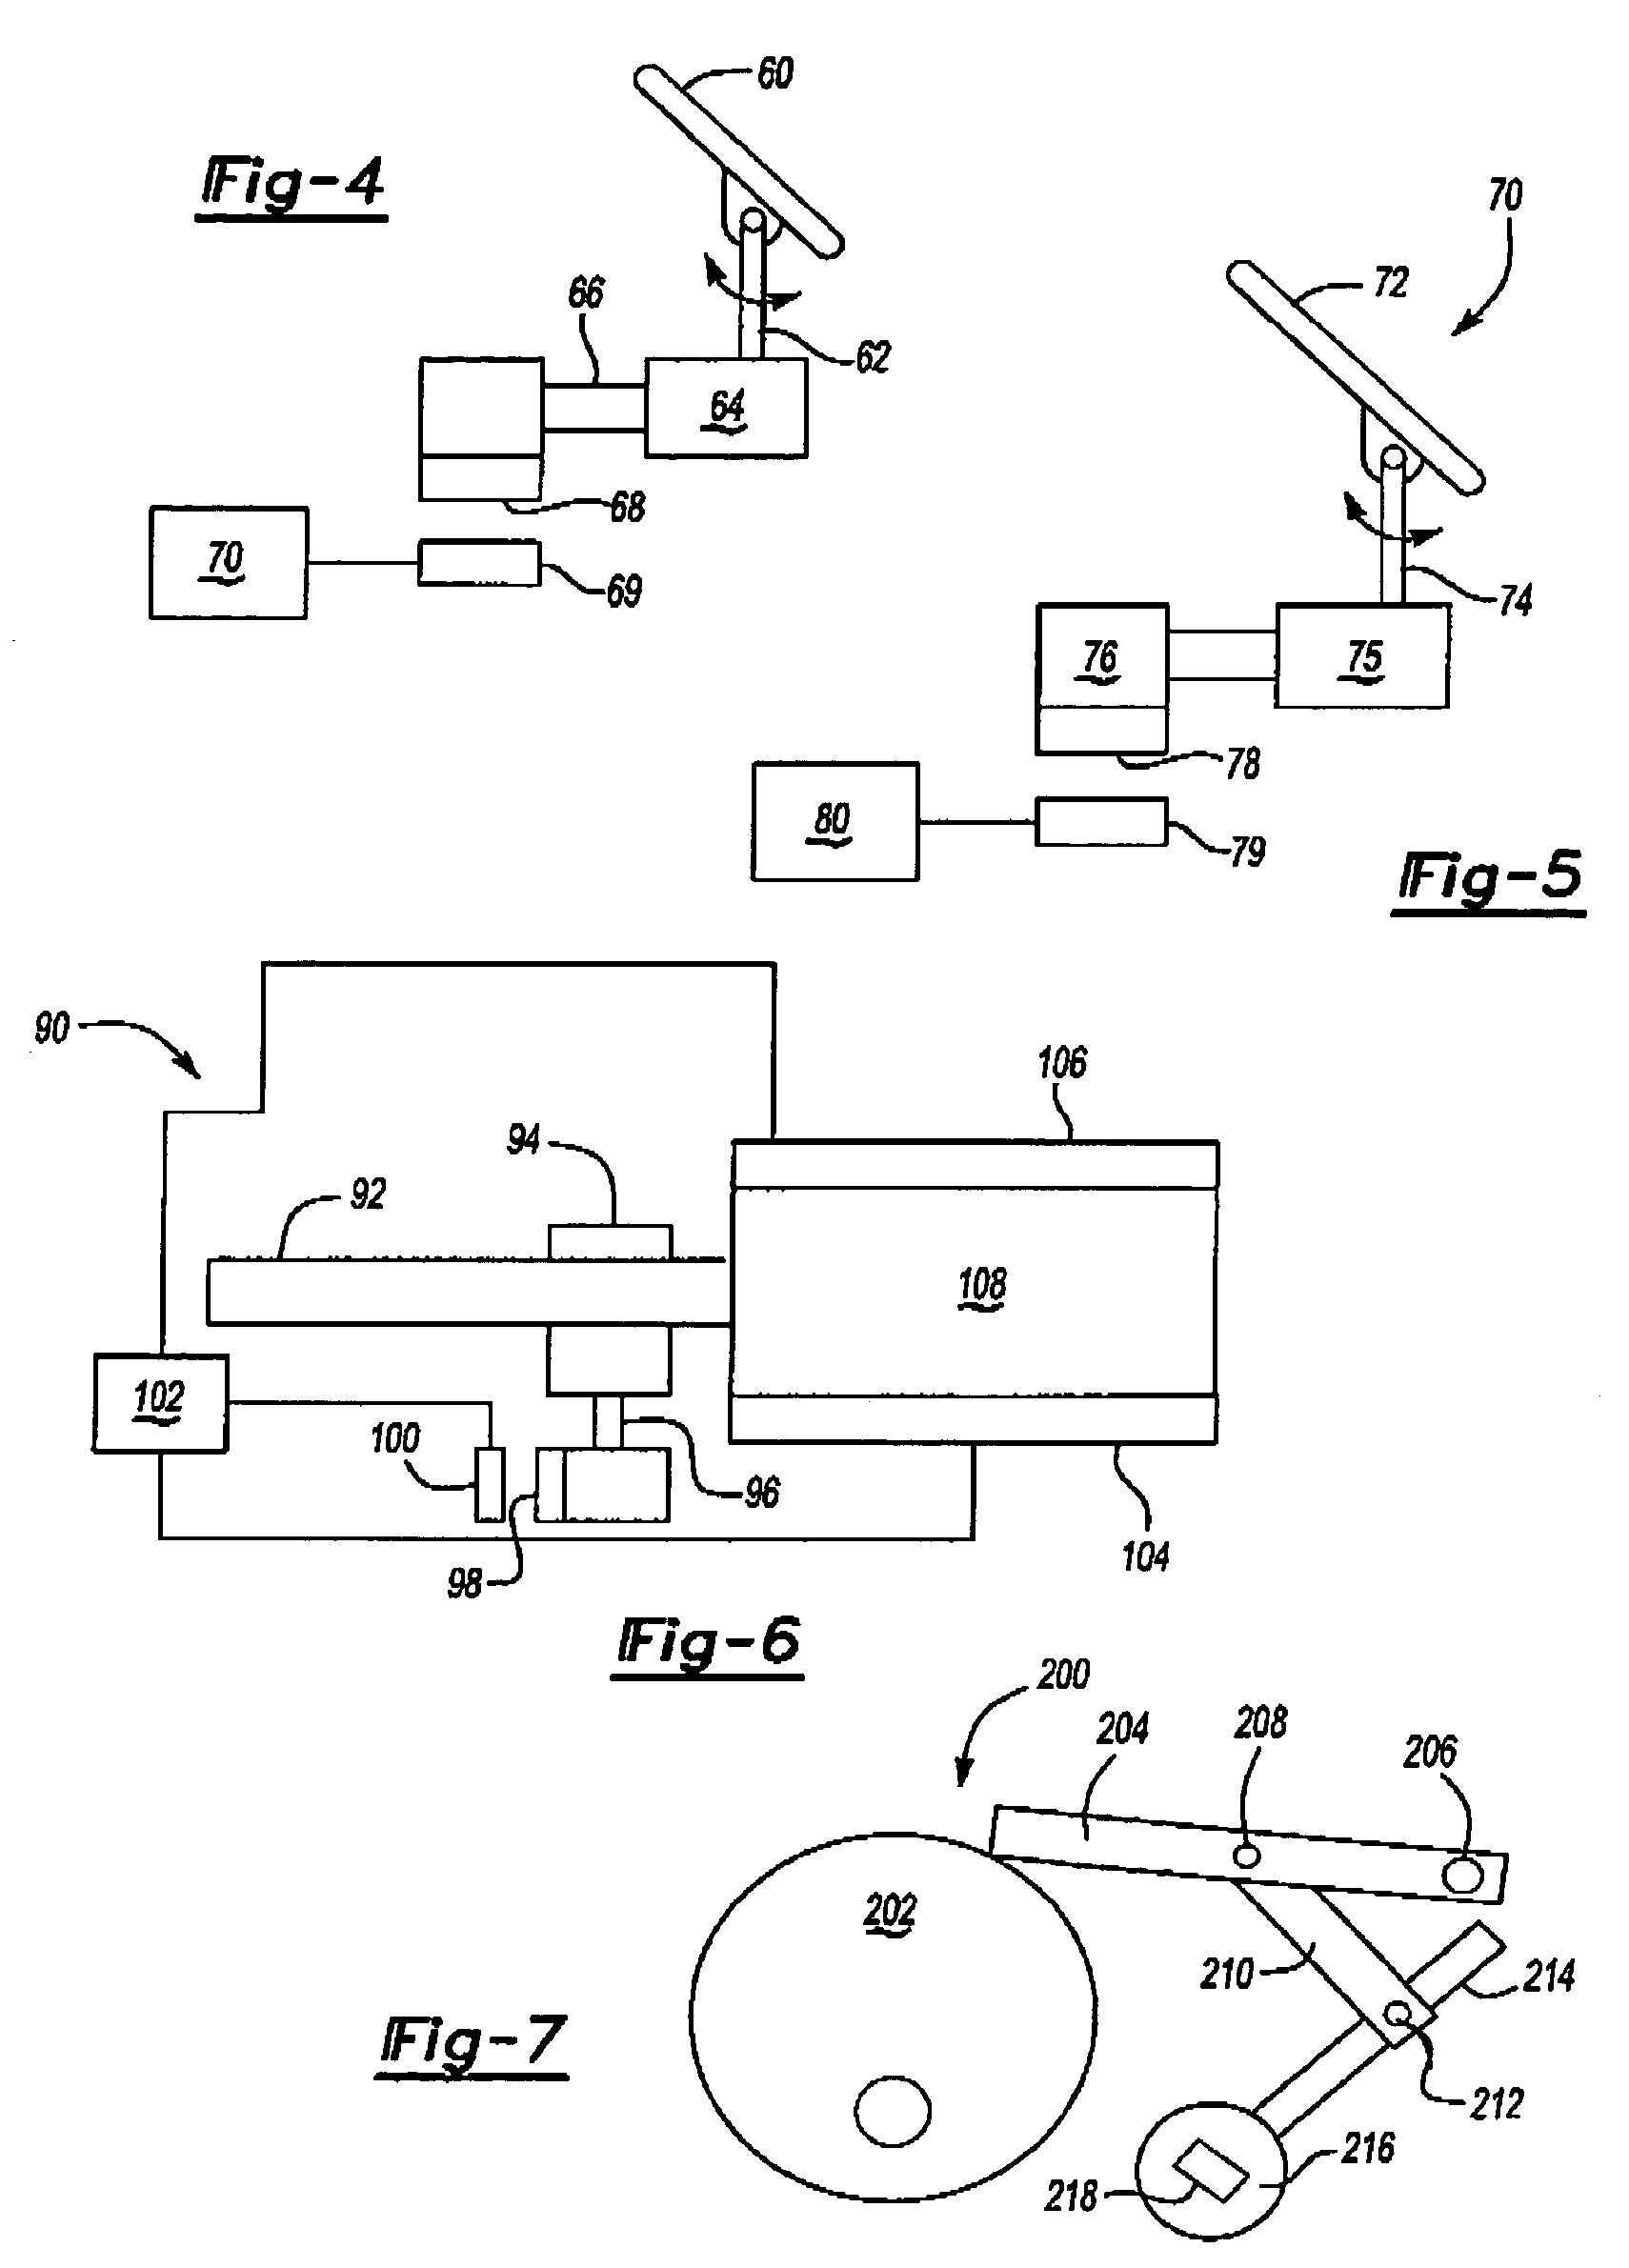 Non-contacting large angle rotary position sensor for rotating shaft